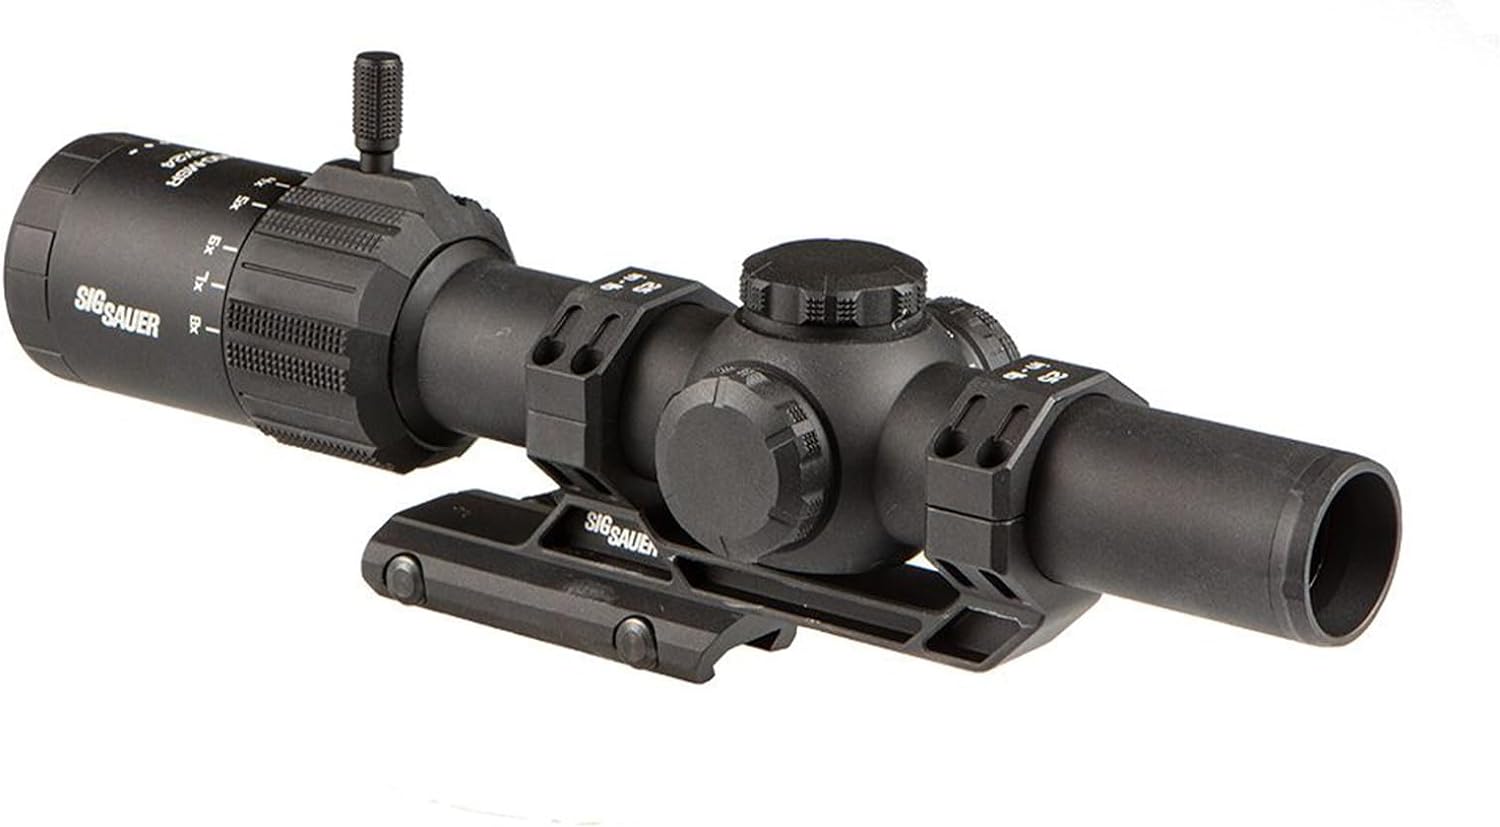 SIG SAUER TANGO-MSR LPVO 1-8x24mm SFP Tactical Riflescope Waterproof Shockproof Gun Scope with 30mm Maintube, Illuminated Reticle, Lens Covers & Cantilever Mount